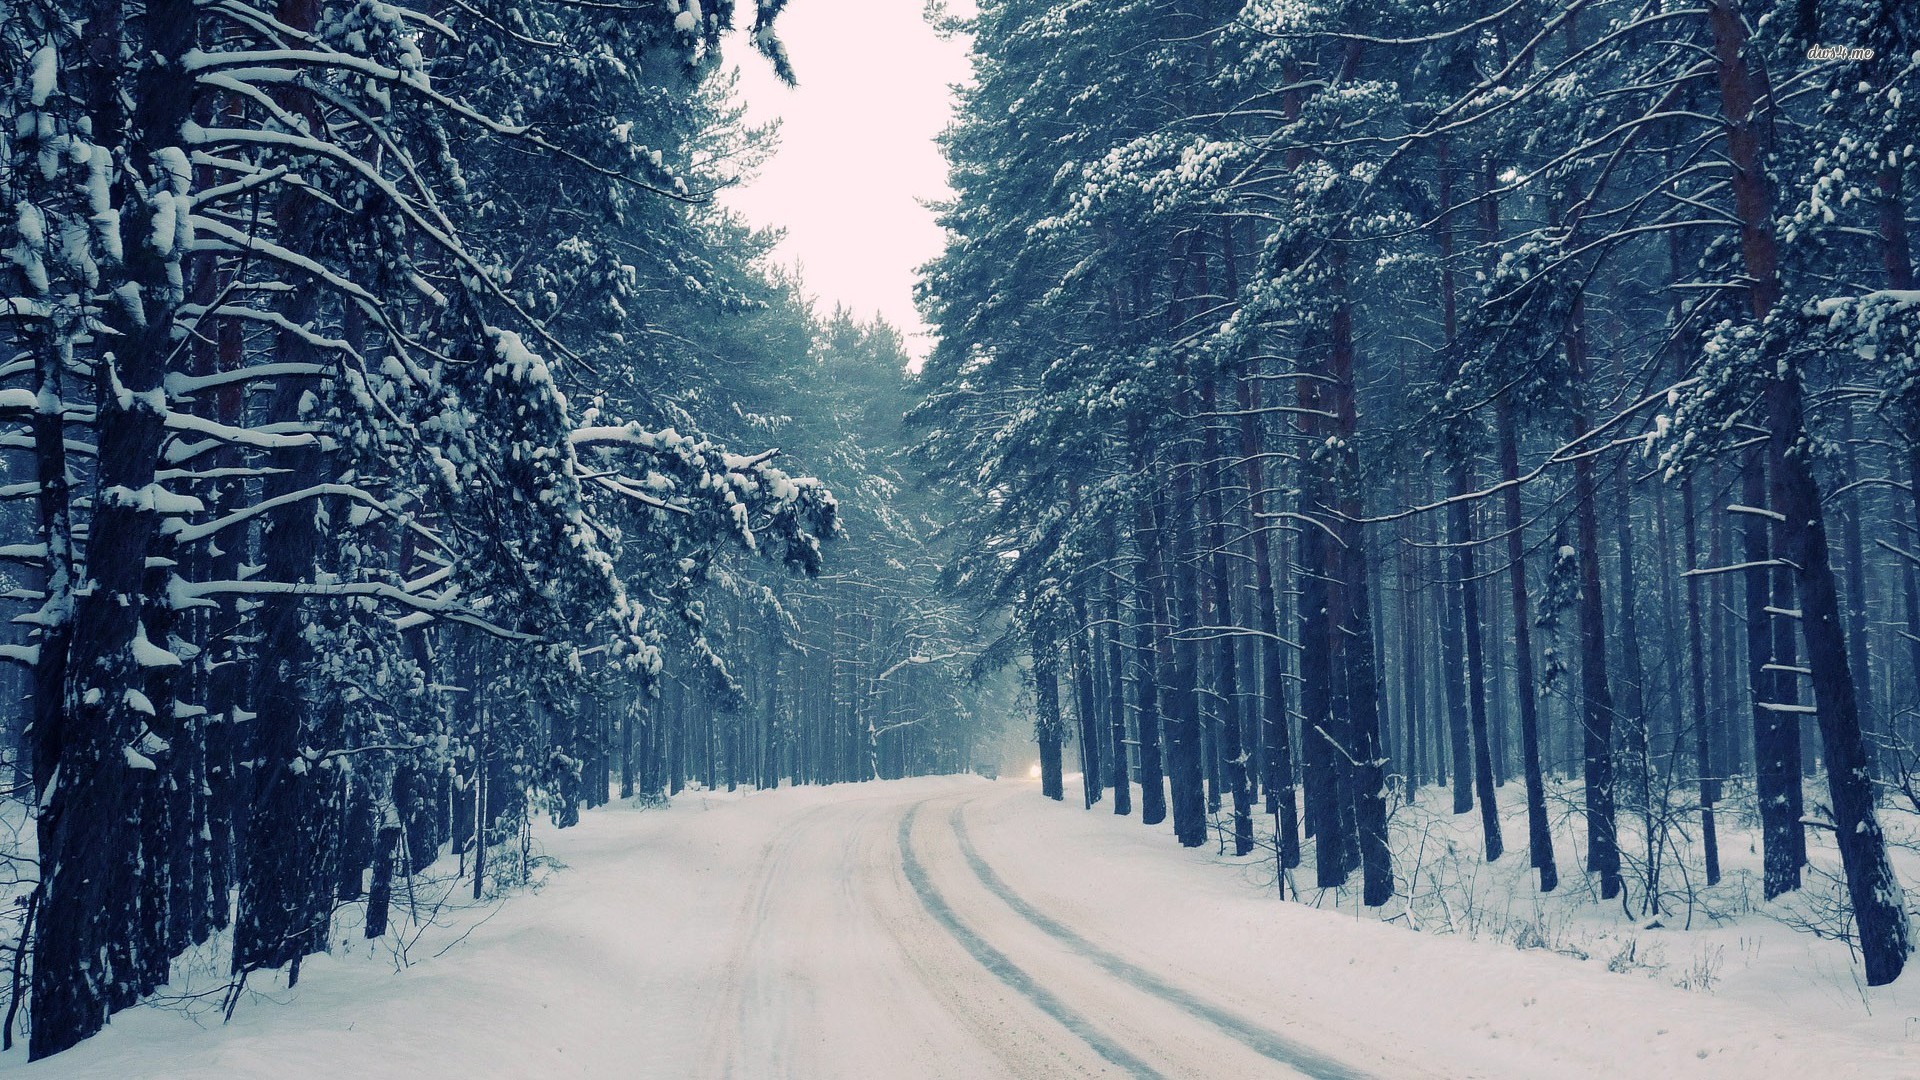 Snowy Road Through The Forest Wallpaper